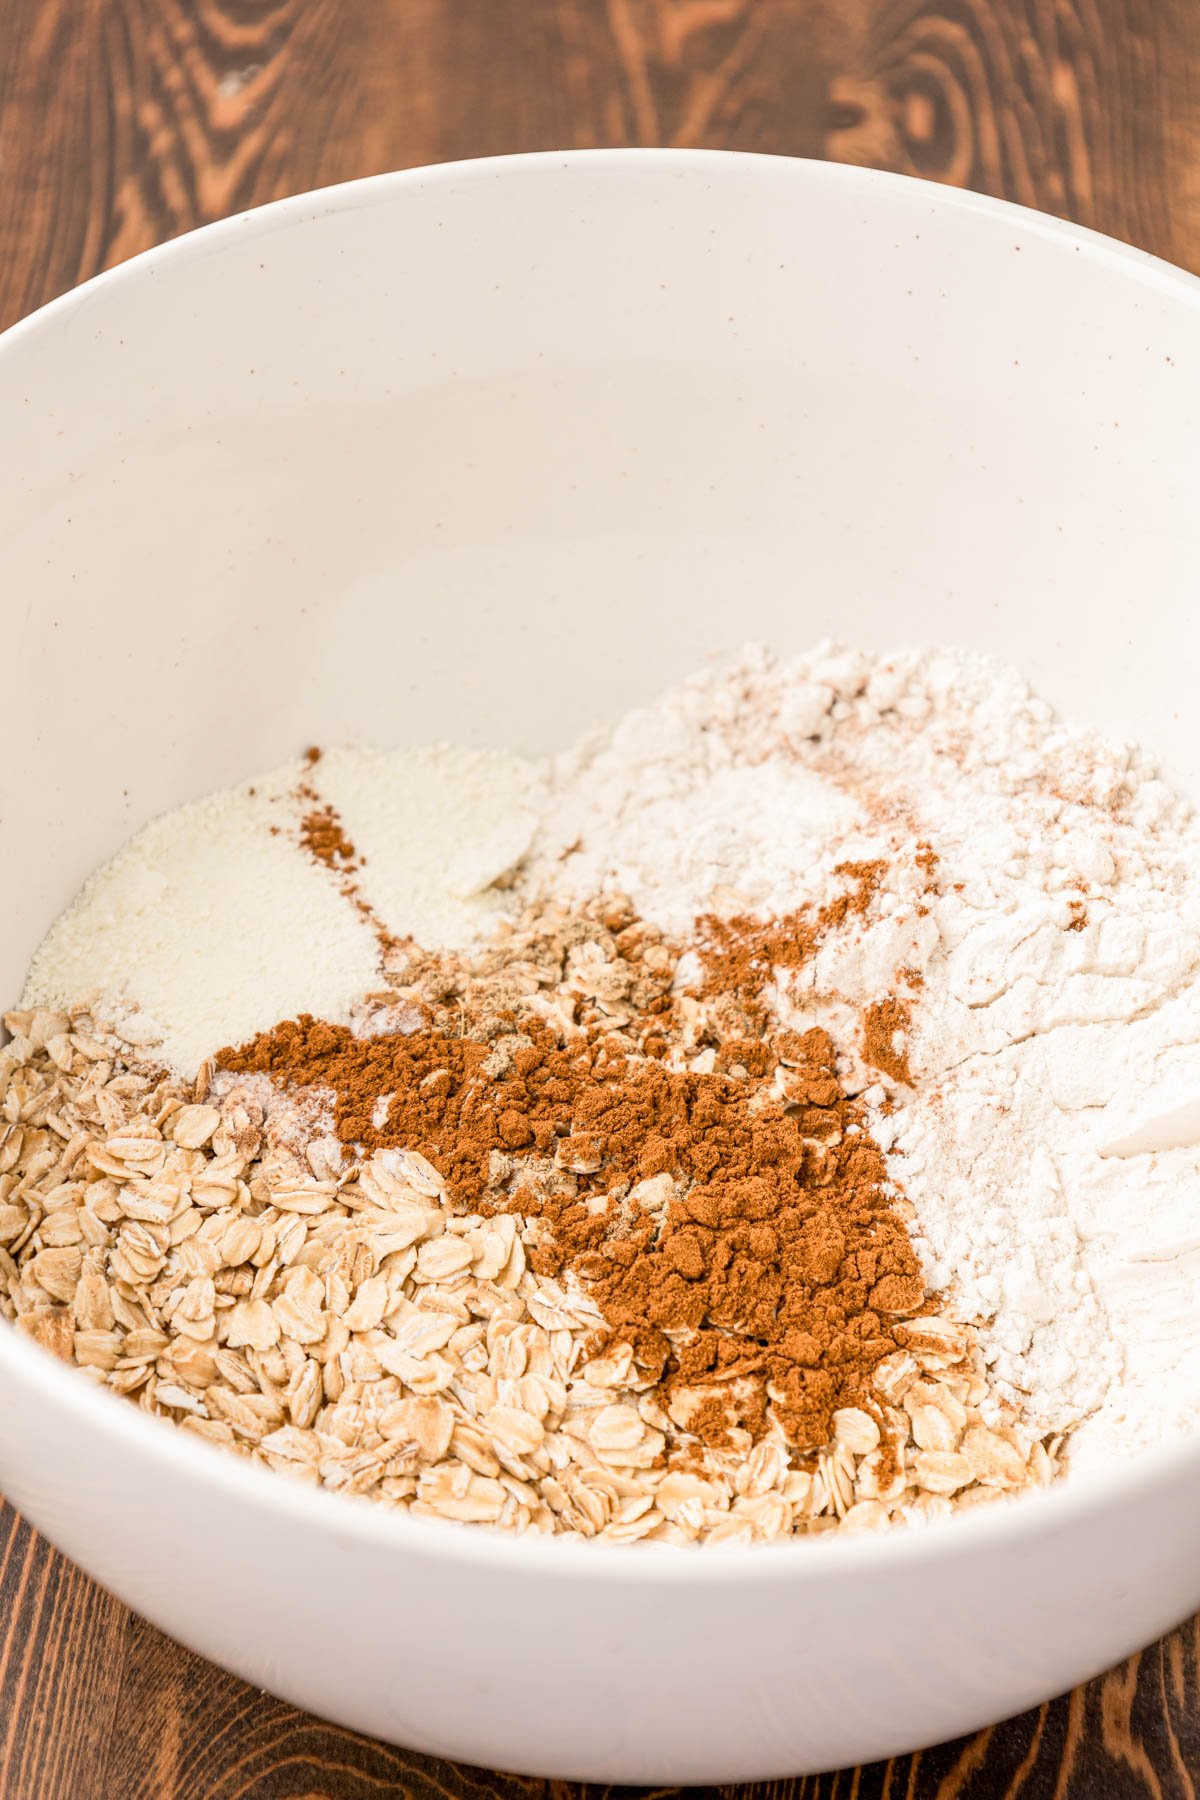 Dry ingredients for oatmeal cookies in a white bowl.